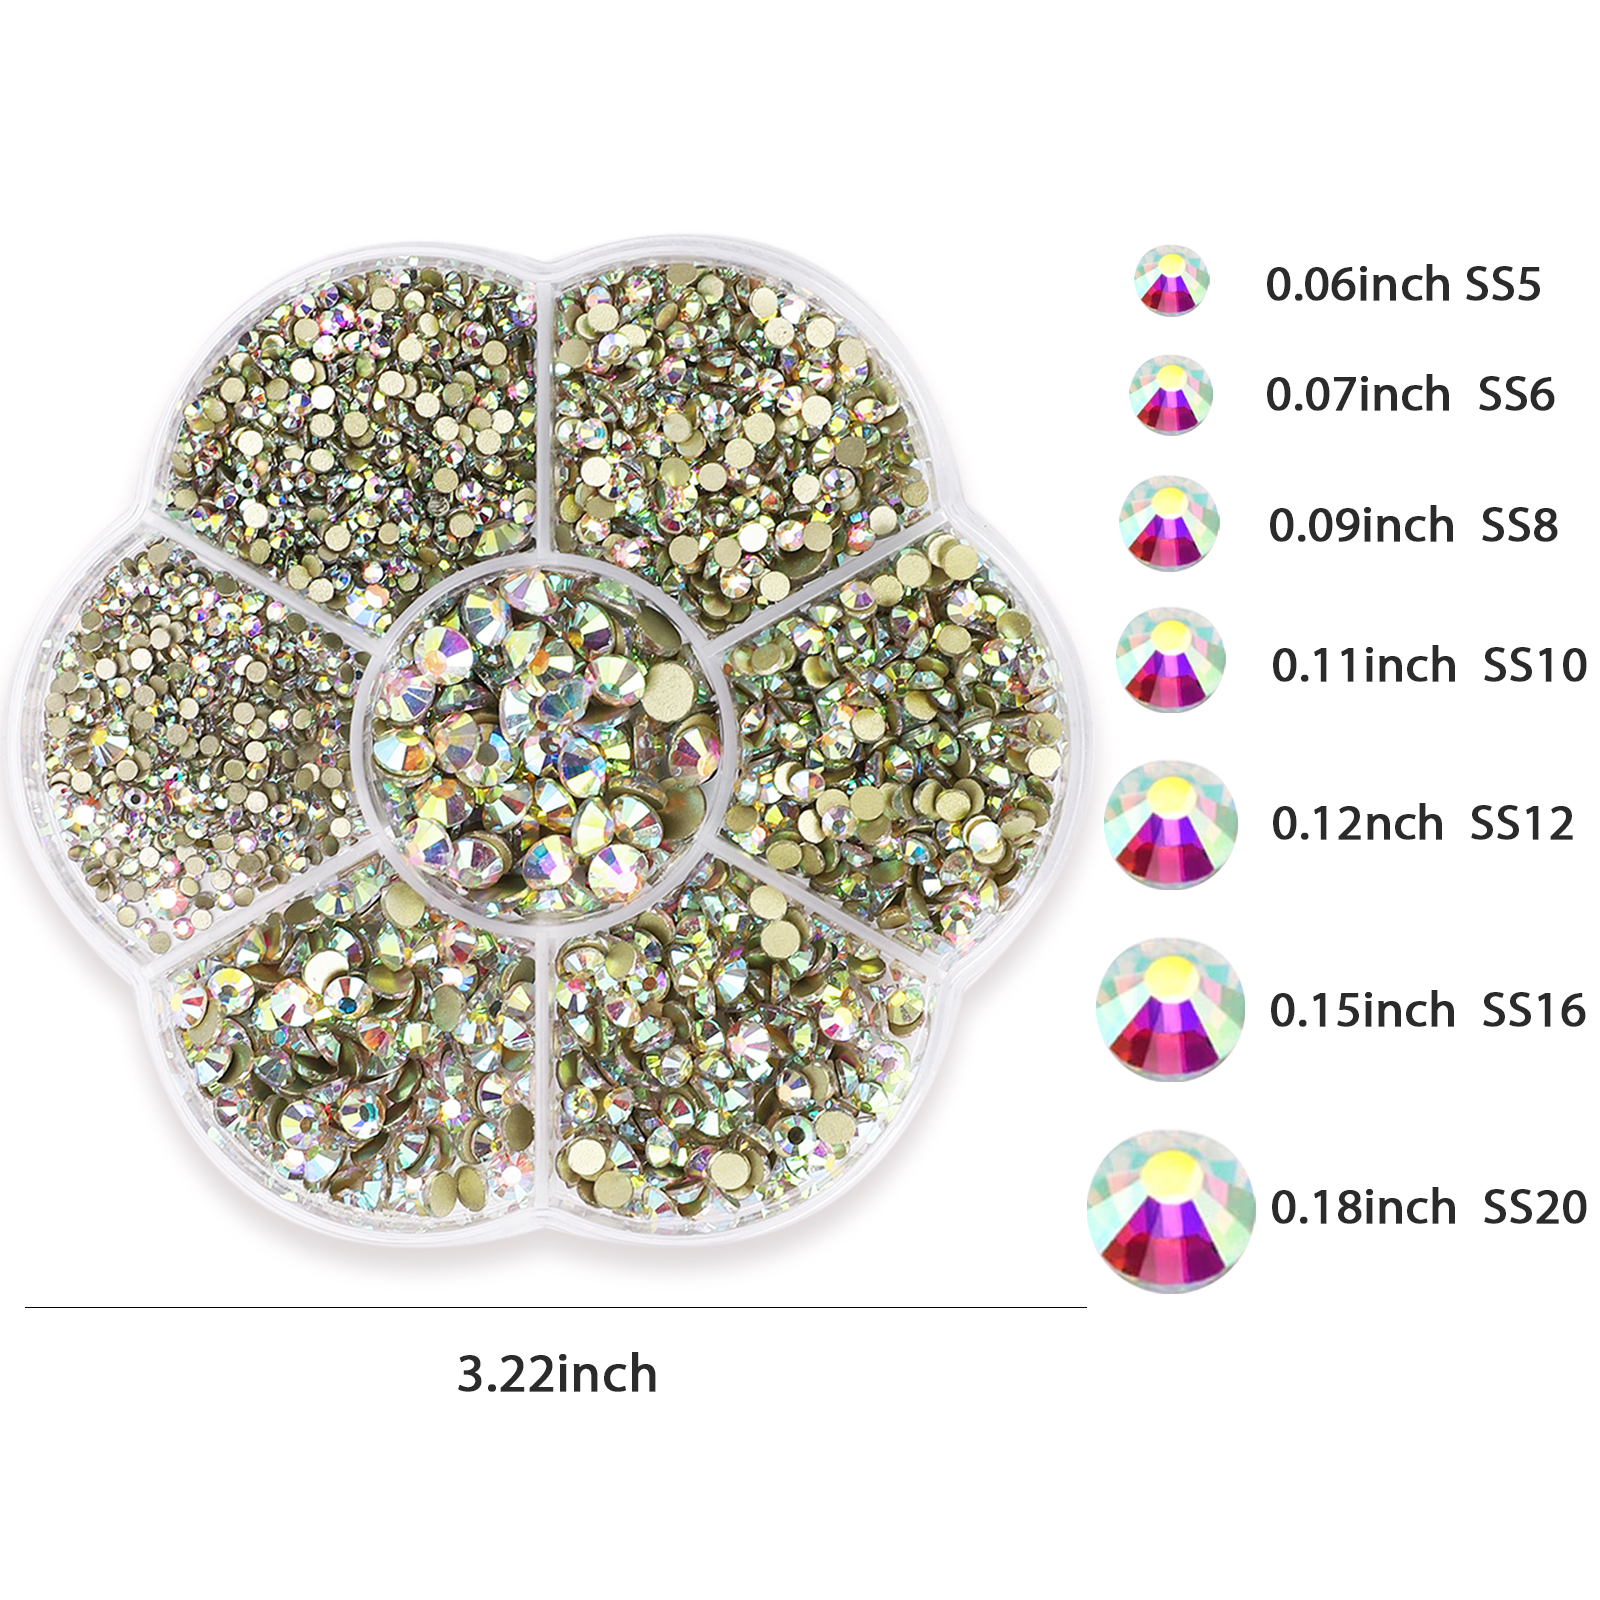 Queenme 2mm Small Rhinestones for Nails Flat Back Glass Nail Crystals for  Crafts Eye Makeup, Round Flatback Stones Shiny No Dull Gems Sparkly Diamond